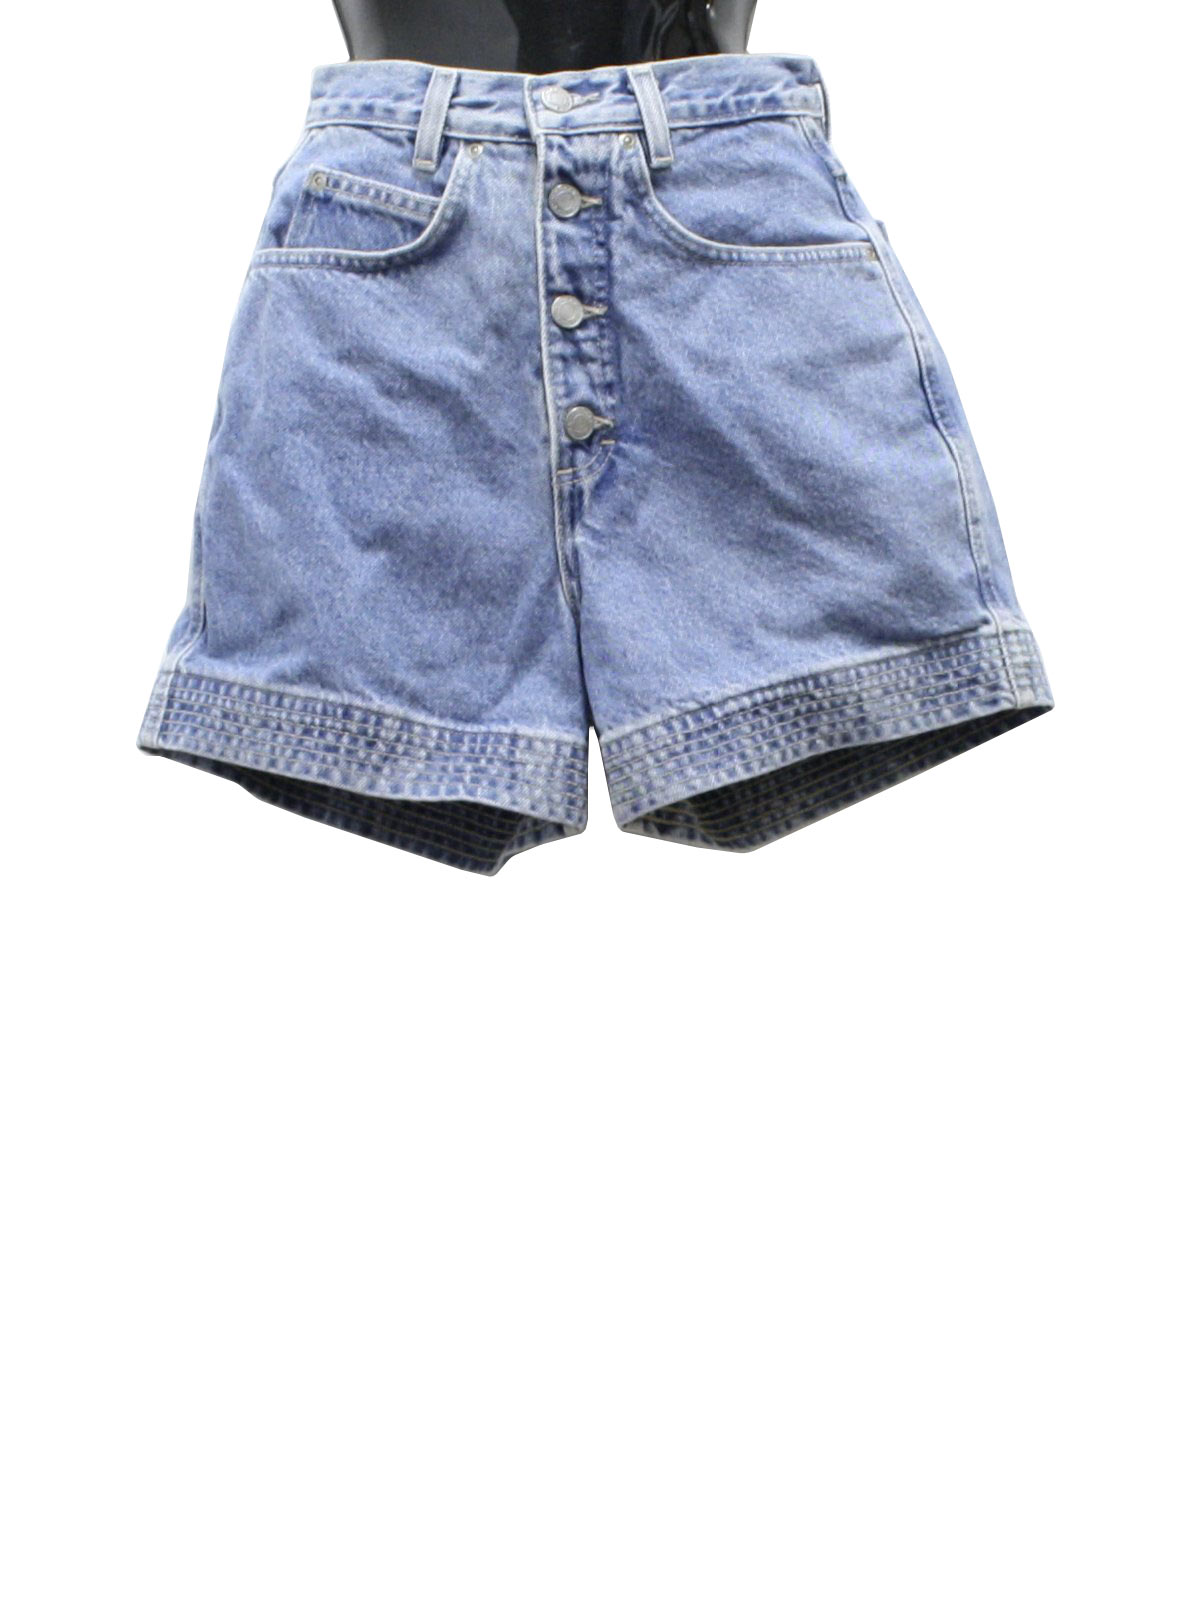 Vintage Honors 1990s Shorts: 90s -Honors- Womens light blue cotton ...